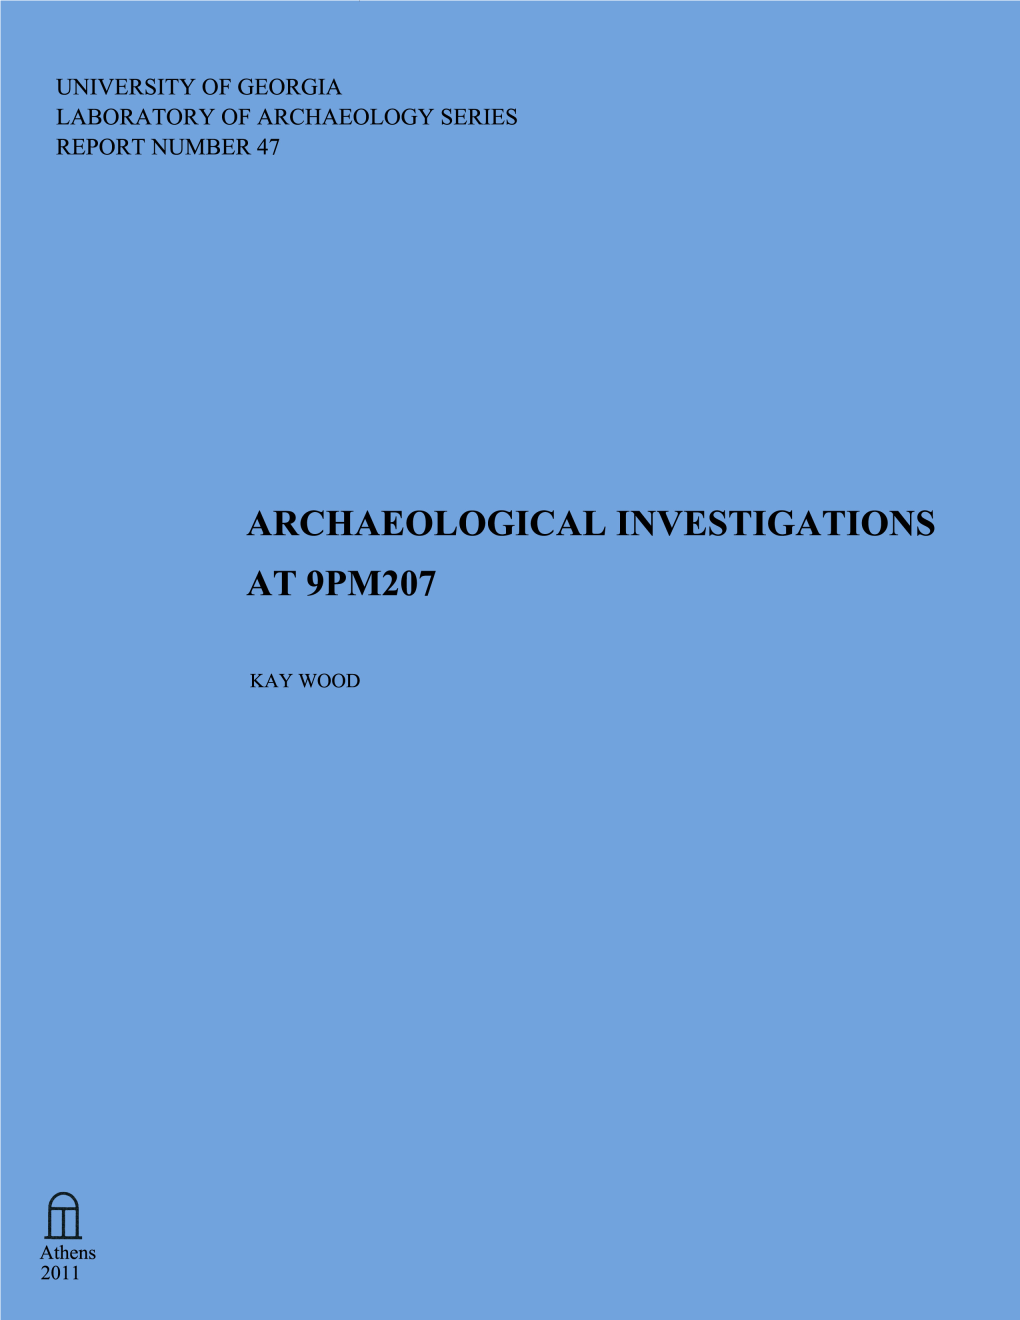 Archaeological Investigations at 9Pm207